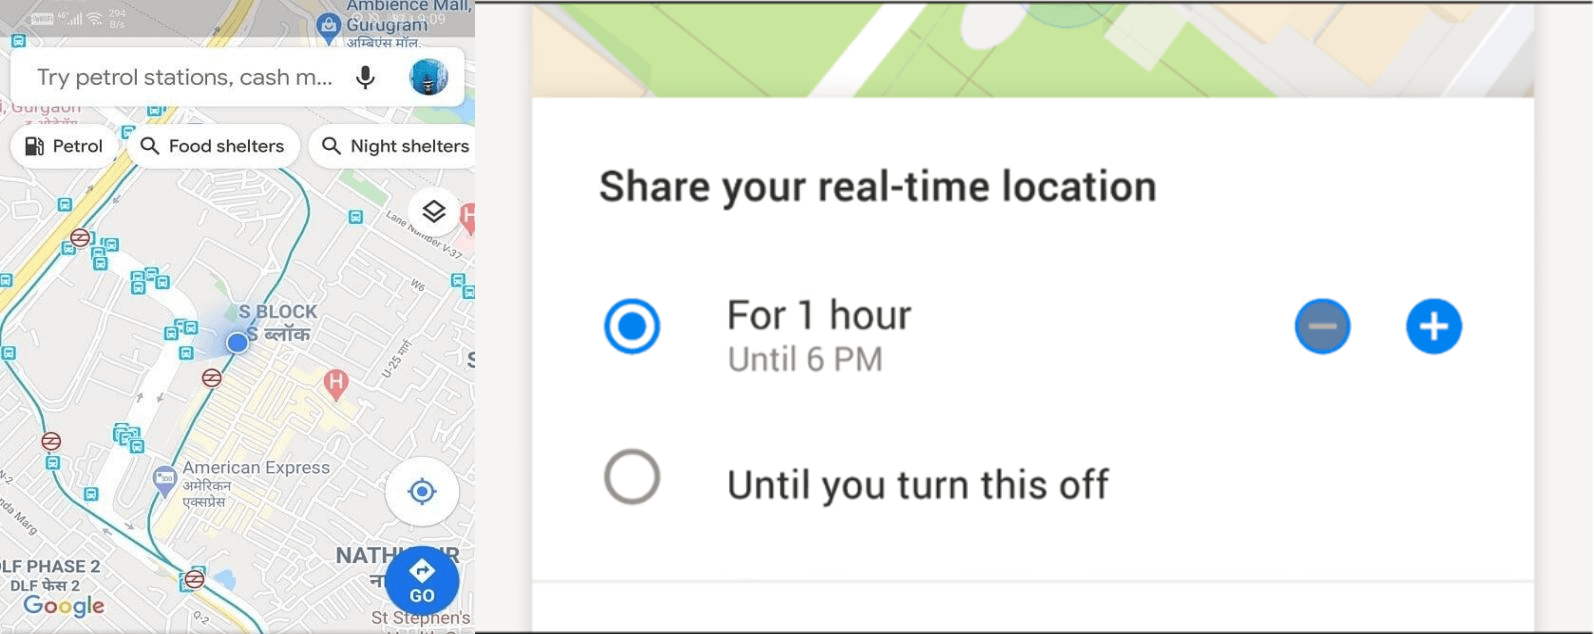 share-real-time-location